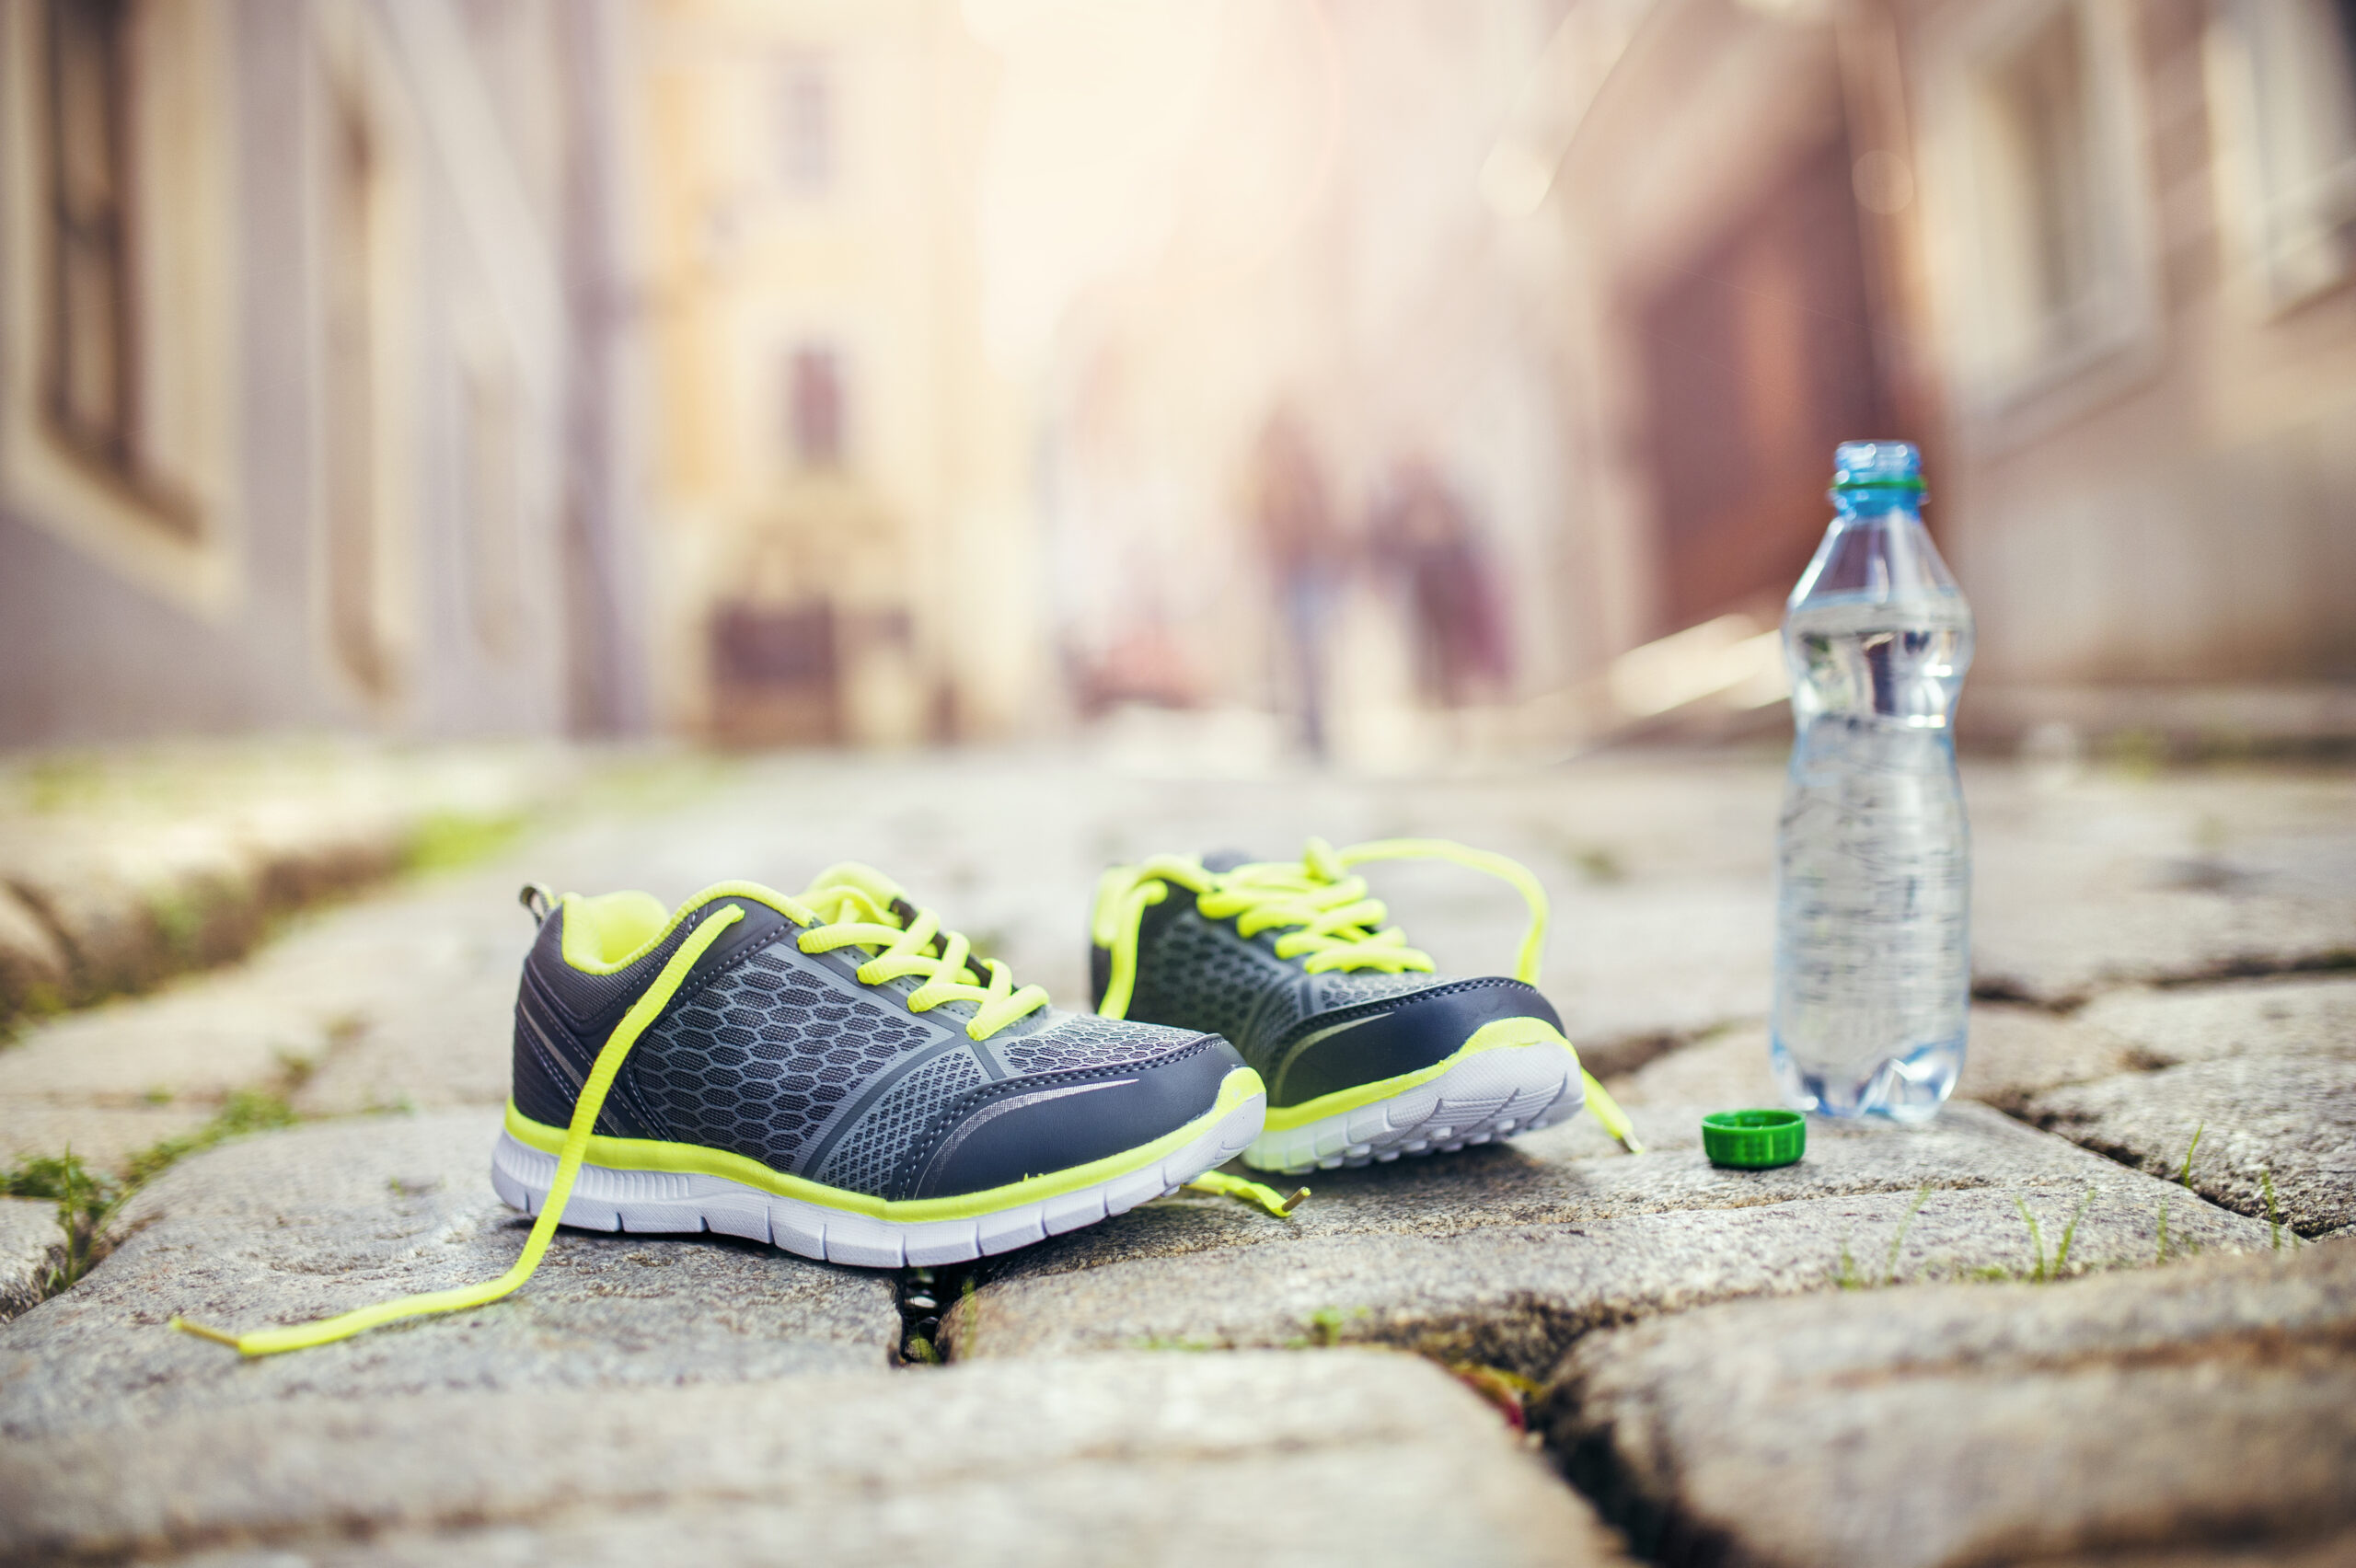 graphicstock-running-shoes-and-bottle-of-water-left-on-tiled-pavement-in-old-city-center_BCbitobhWb-scaled Lose Weight Safely: The Best Advice from Experts for Long-Term Success